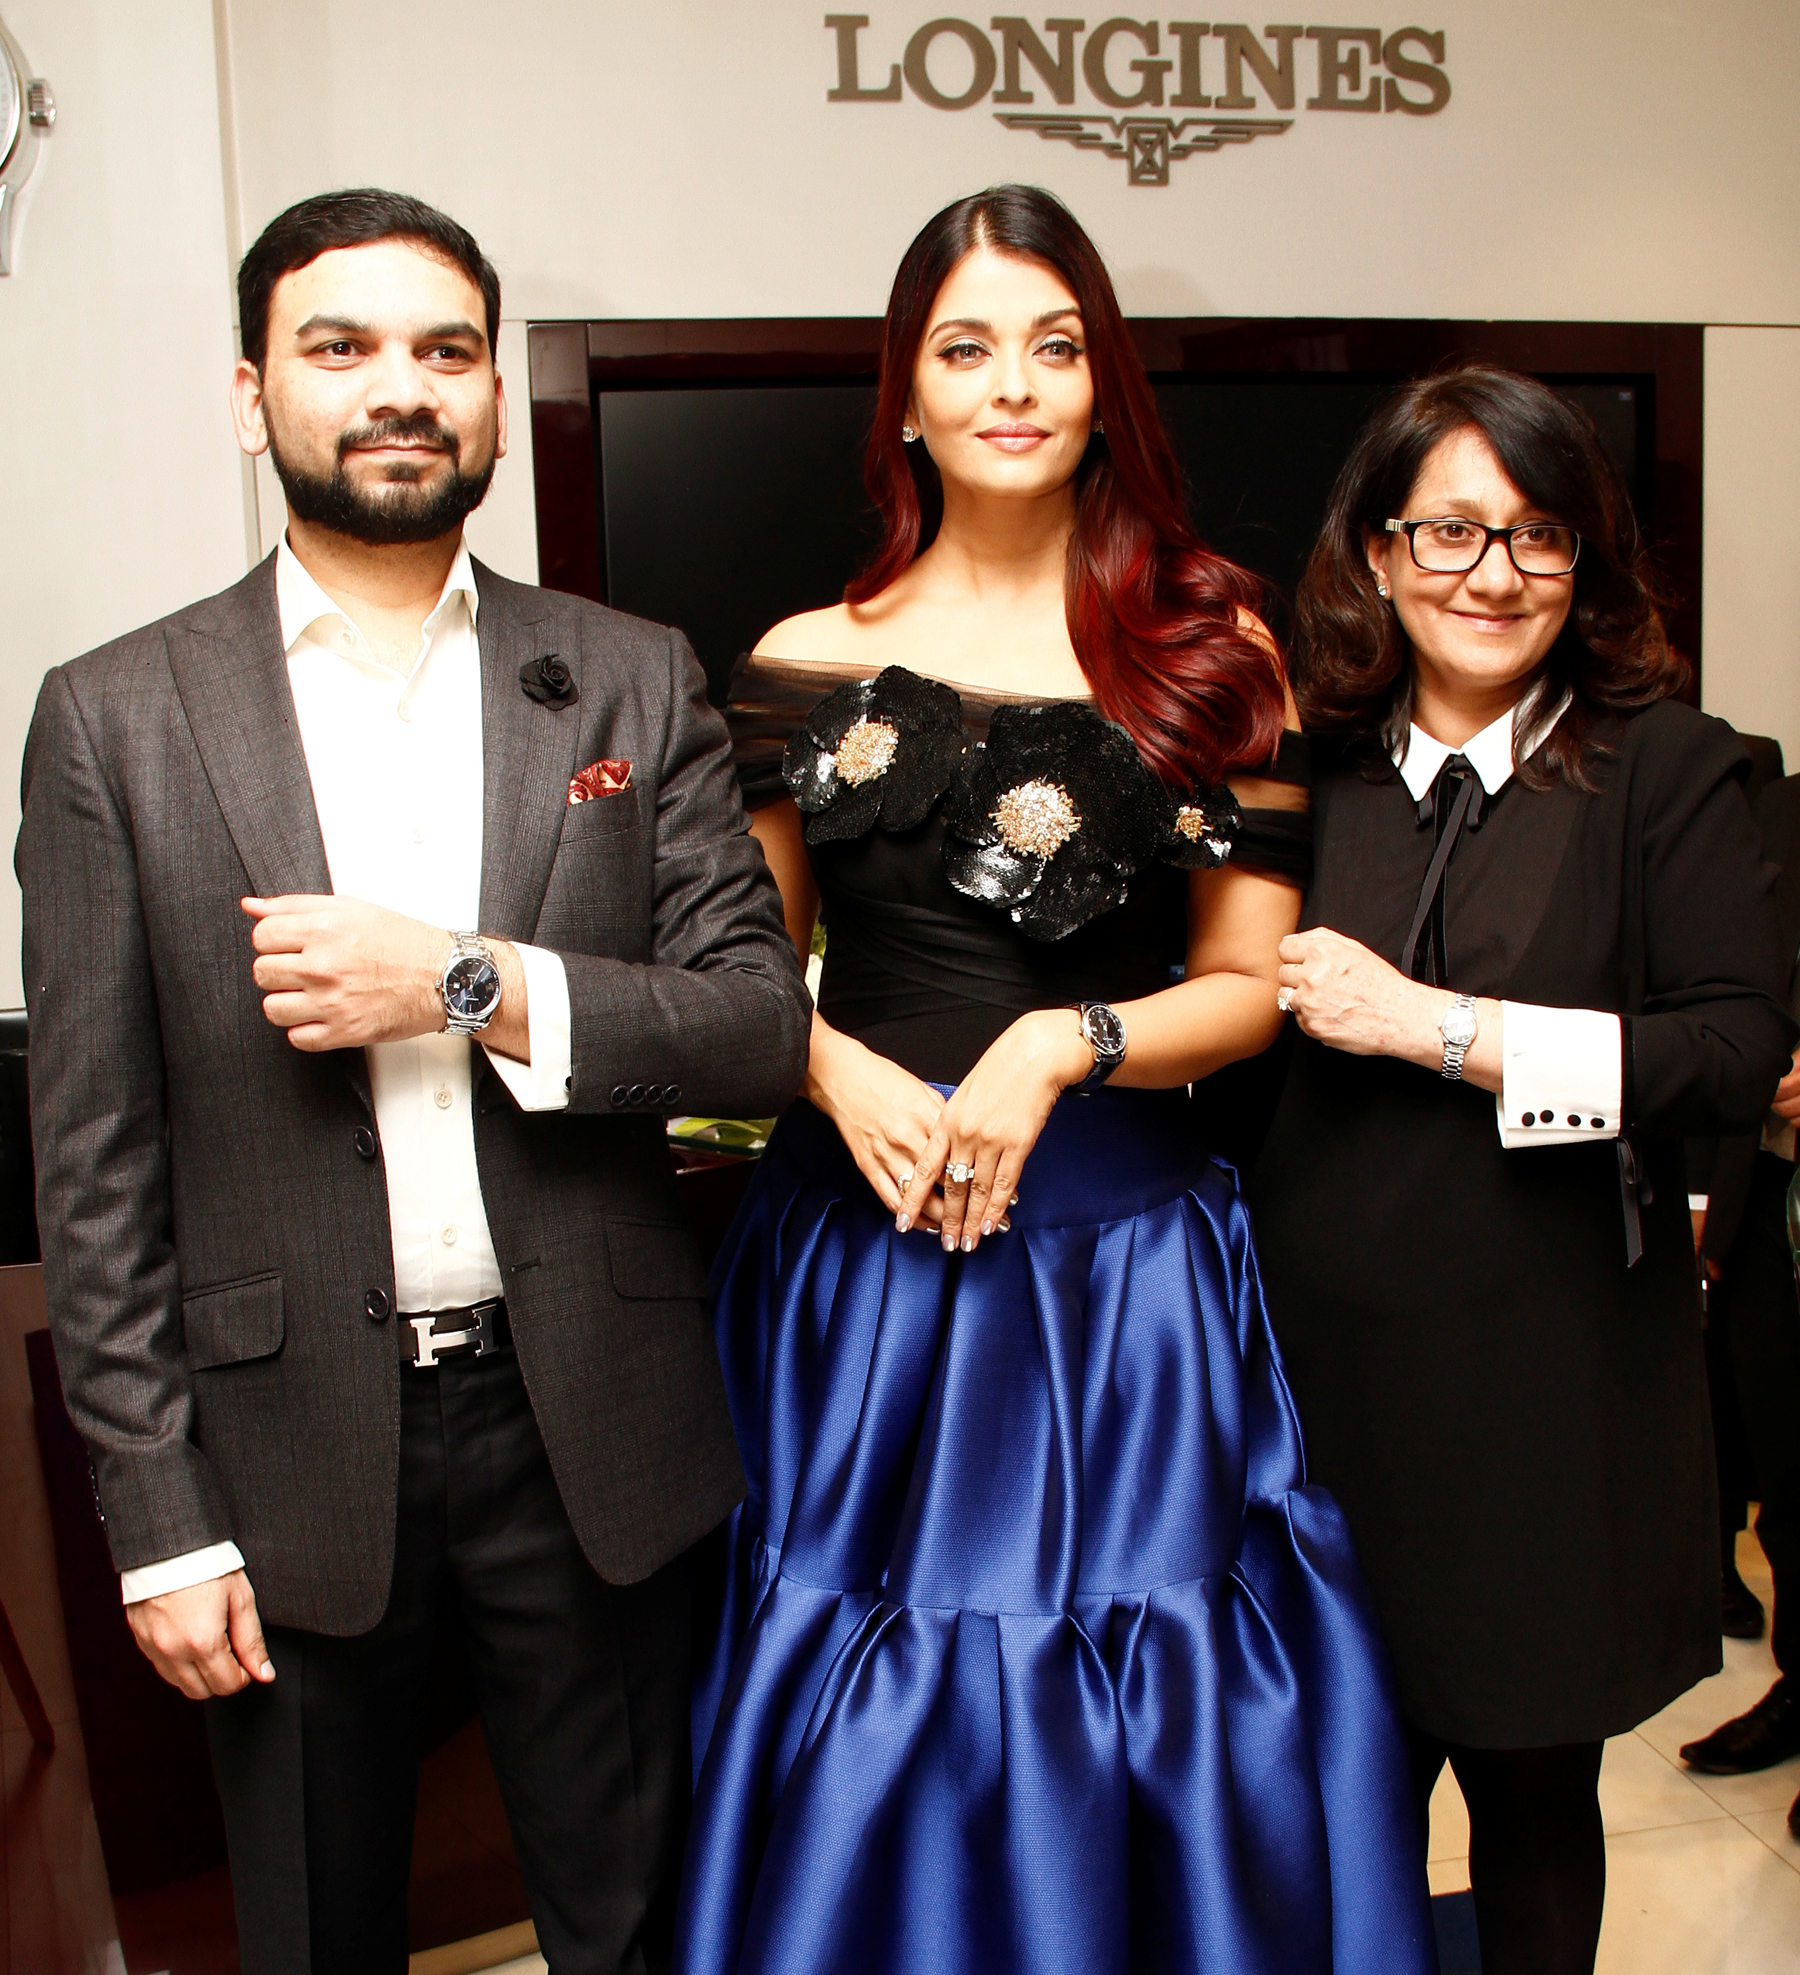 Ms. Achla Chawla, Brand Manager, Longines India, Mr. Sharjeel Khan, Director, Zimson Times Pvt. Ltd. and Longines Ambassador of Elegance, Aishwarya Rai Bachchan at the launch of Longines Master Collection blue dial at Longines Boutique, U.B. City, Bengaluru.